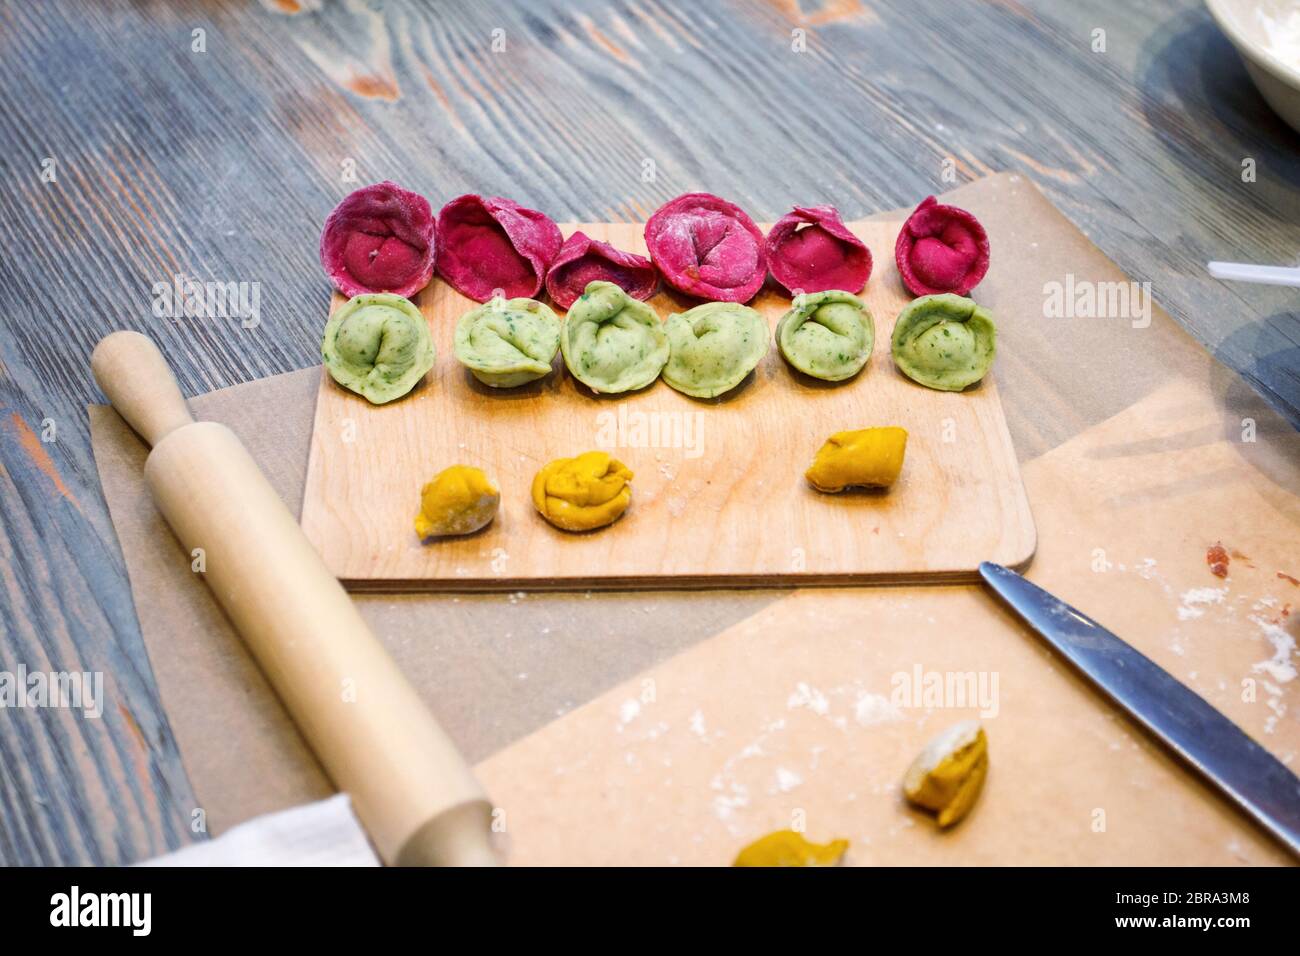 Cooking class, culinary. food and people concept, molding of colorful pelmeni or meat dumplings, national traditional food, creative color menu Stock Photo